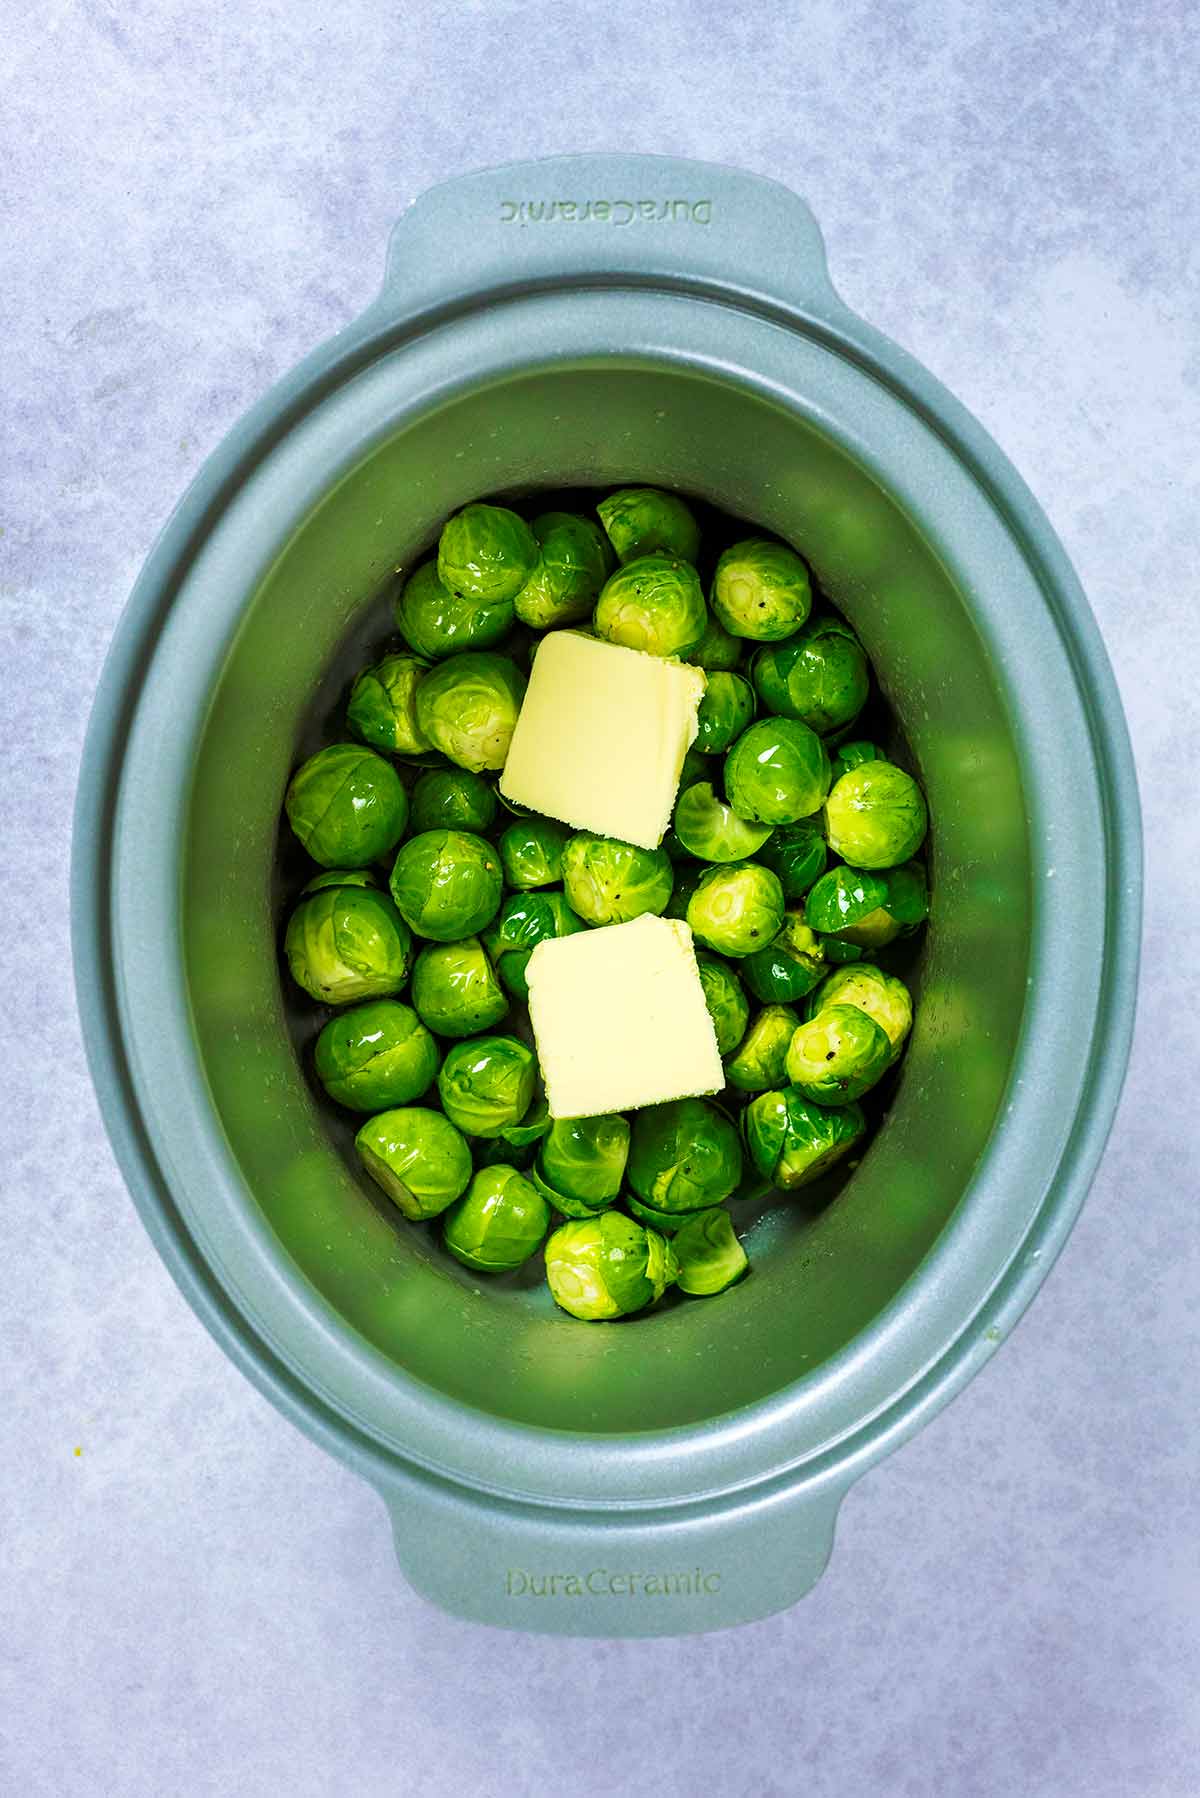 A slow cooker containing Brussels sprouts and two knobs of butter.